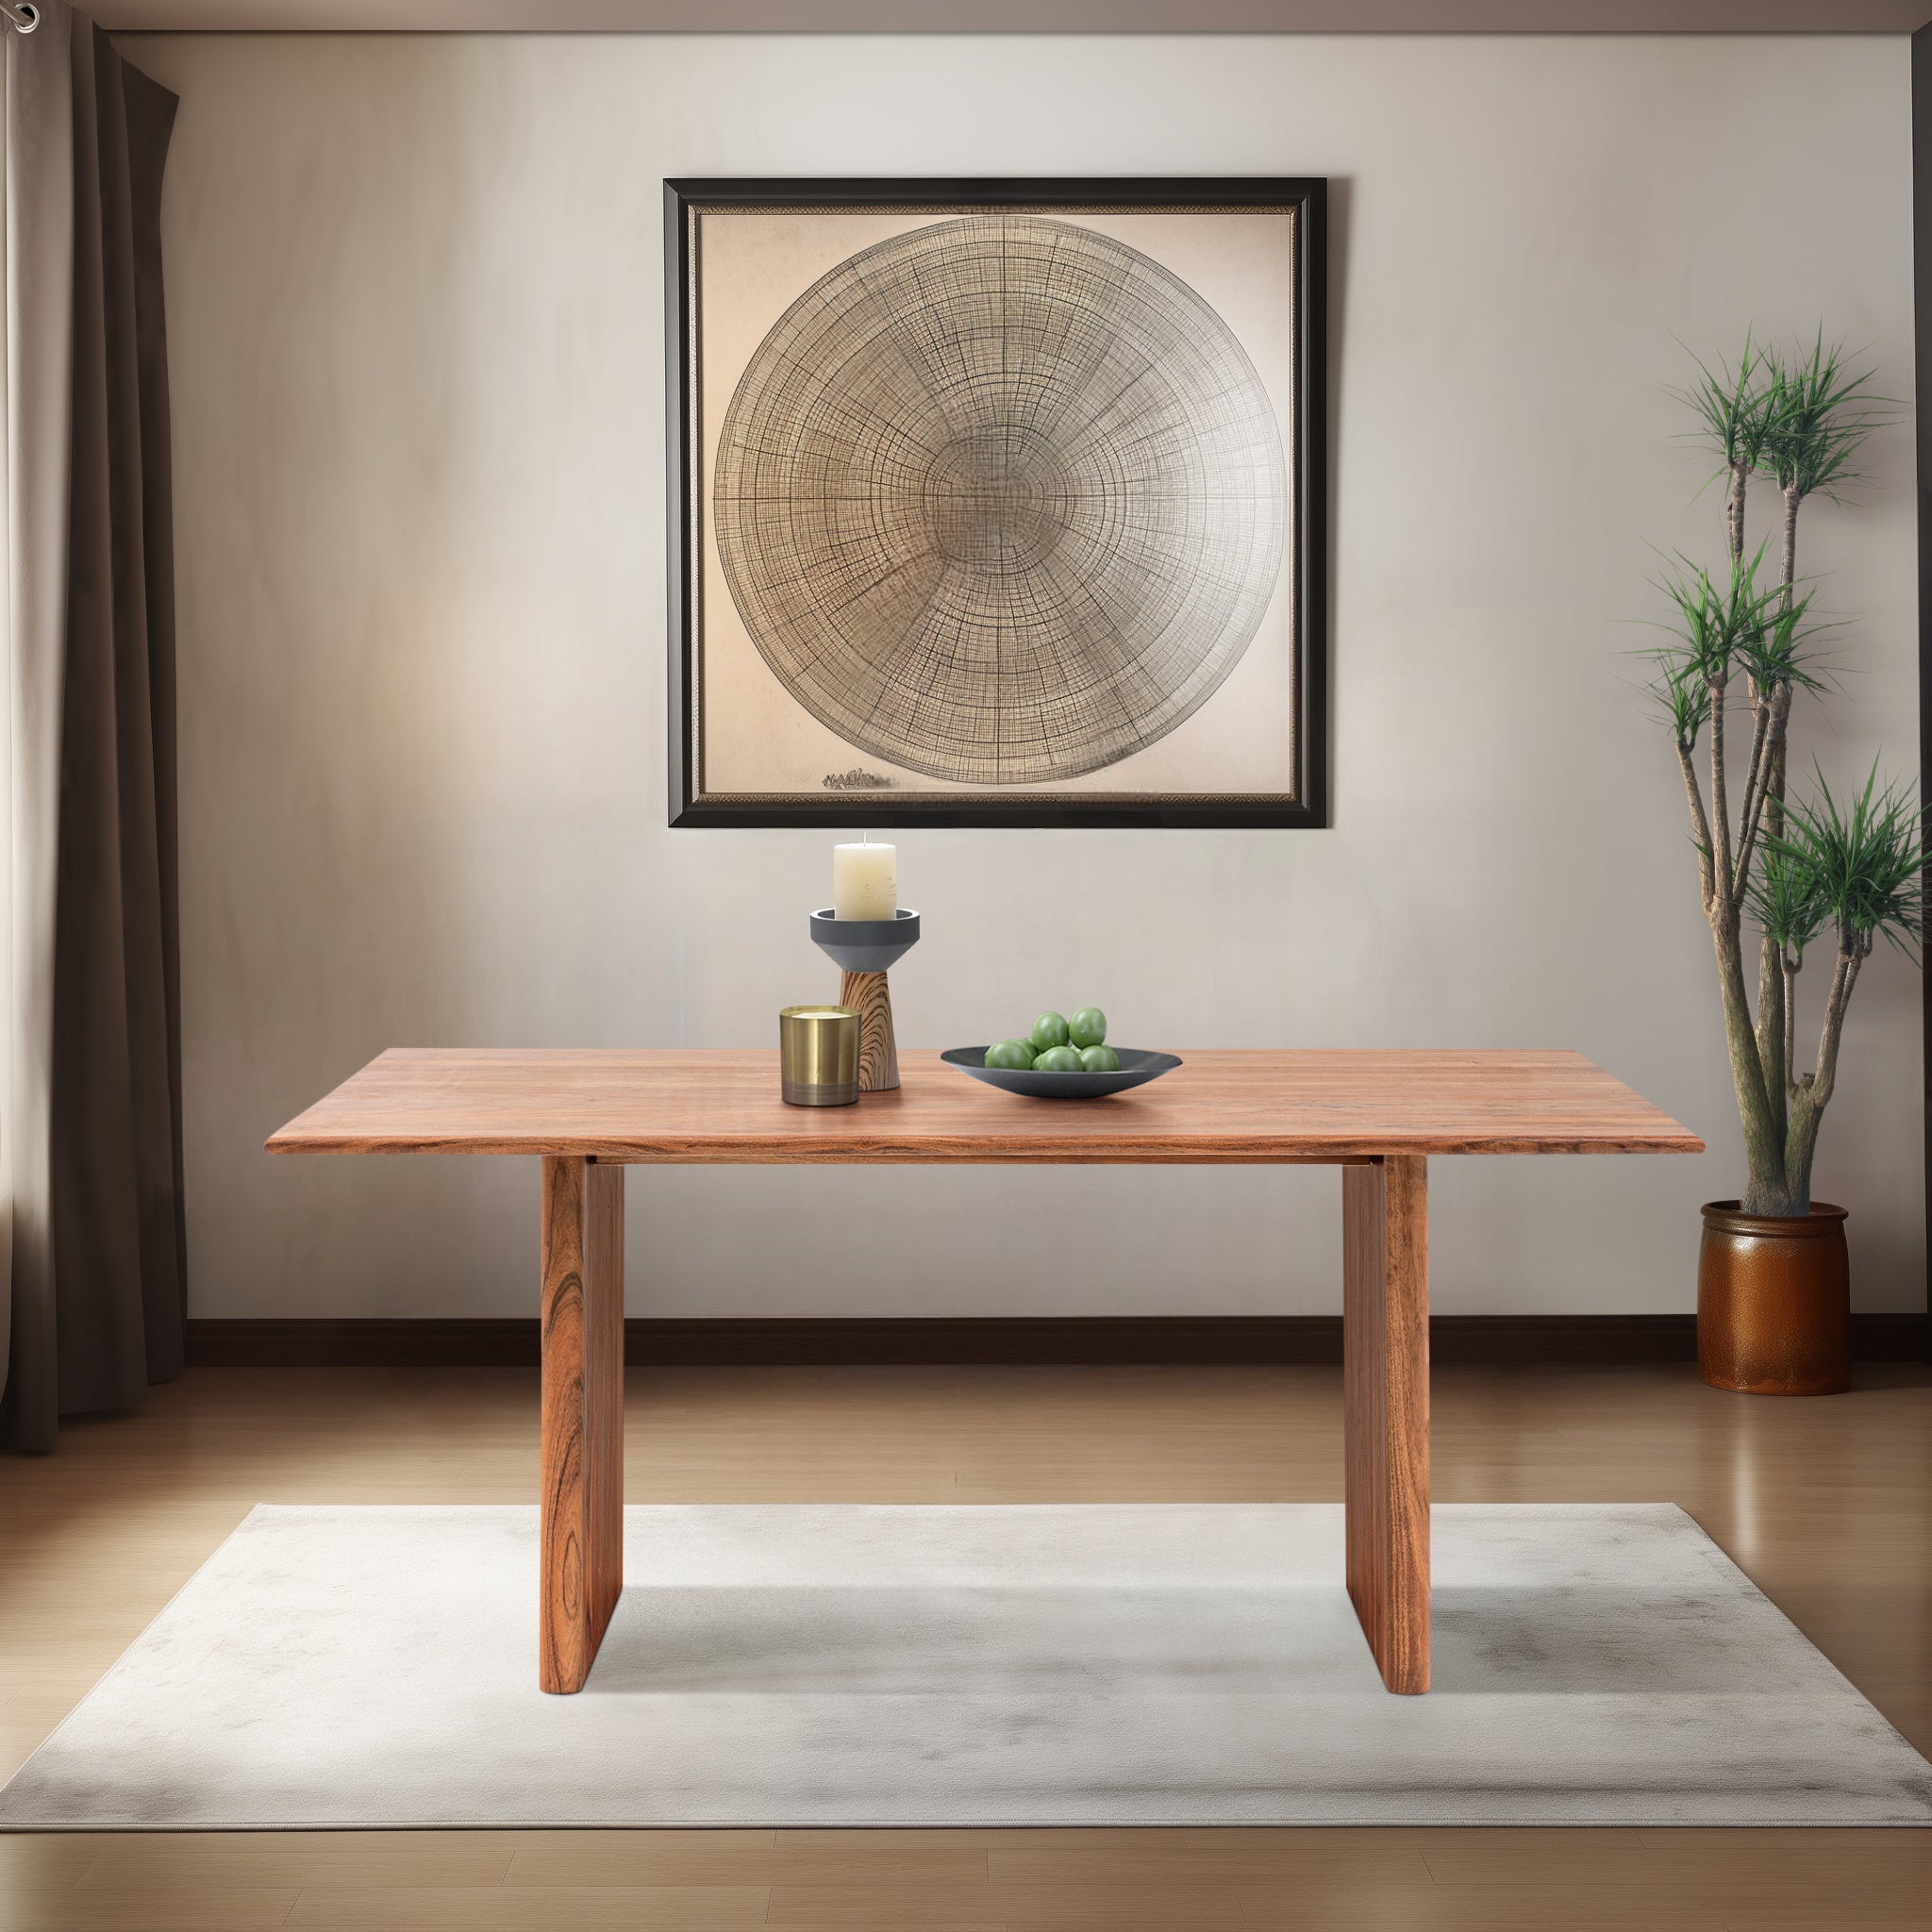 The Contemporary Rectangle Dining Table